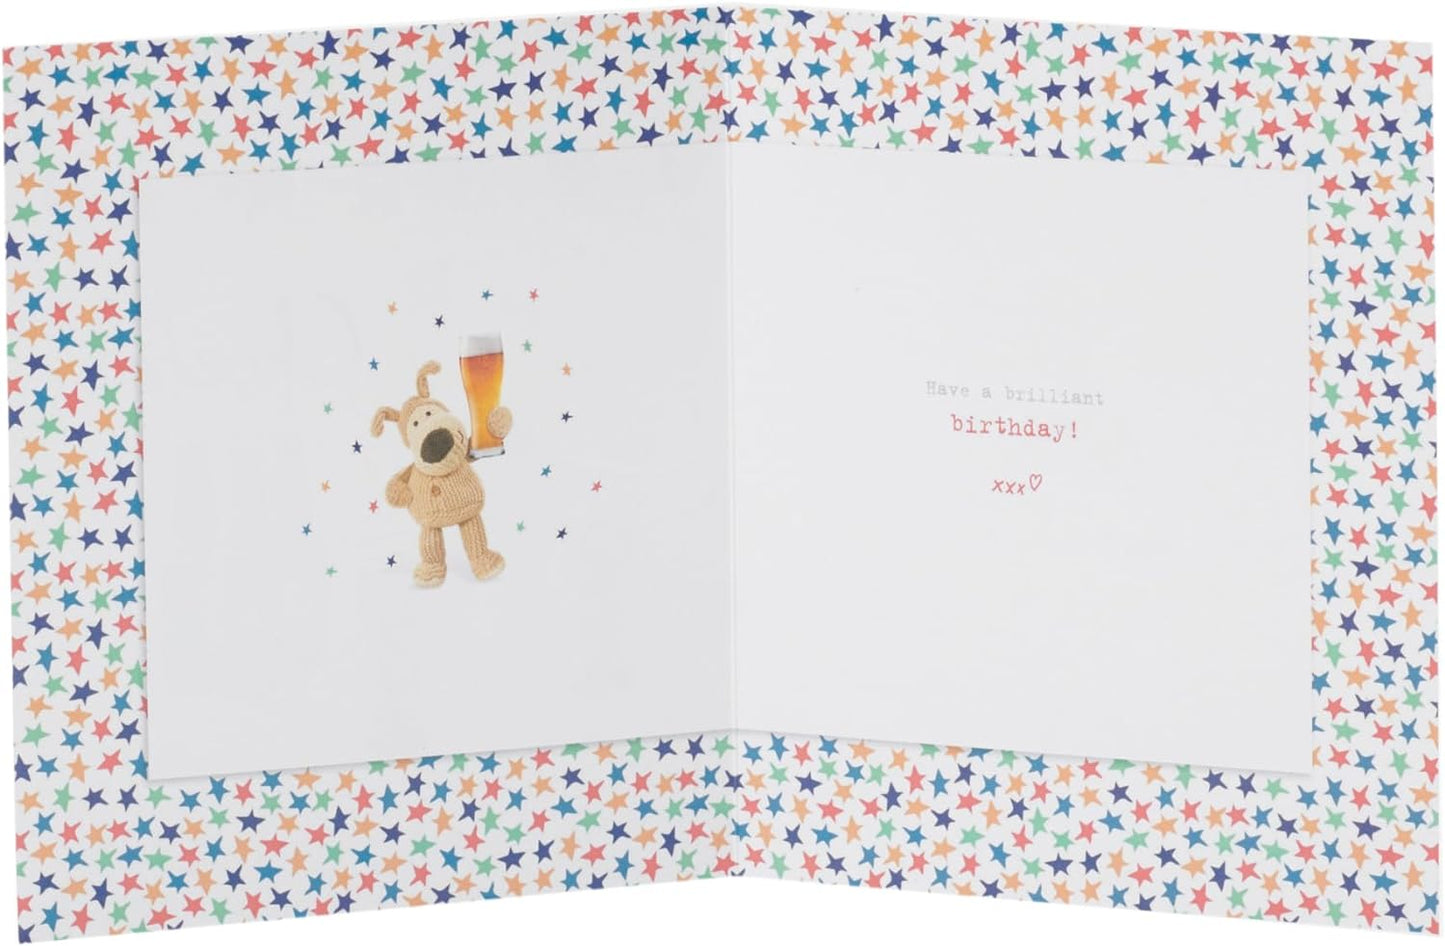 Cute Design Boofle Brother-In-Law Birthday Card